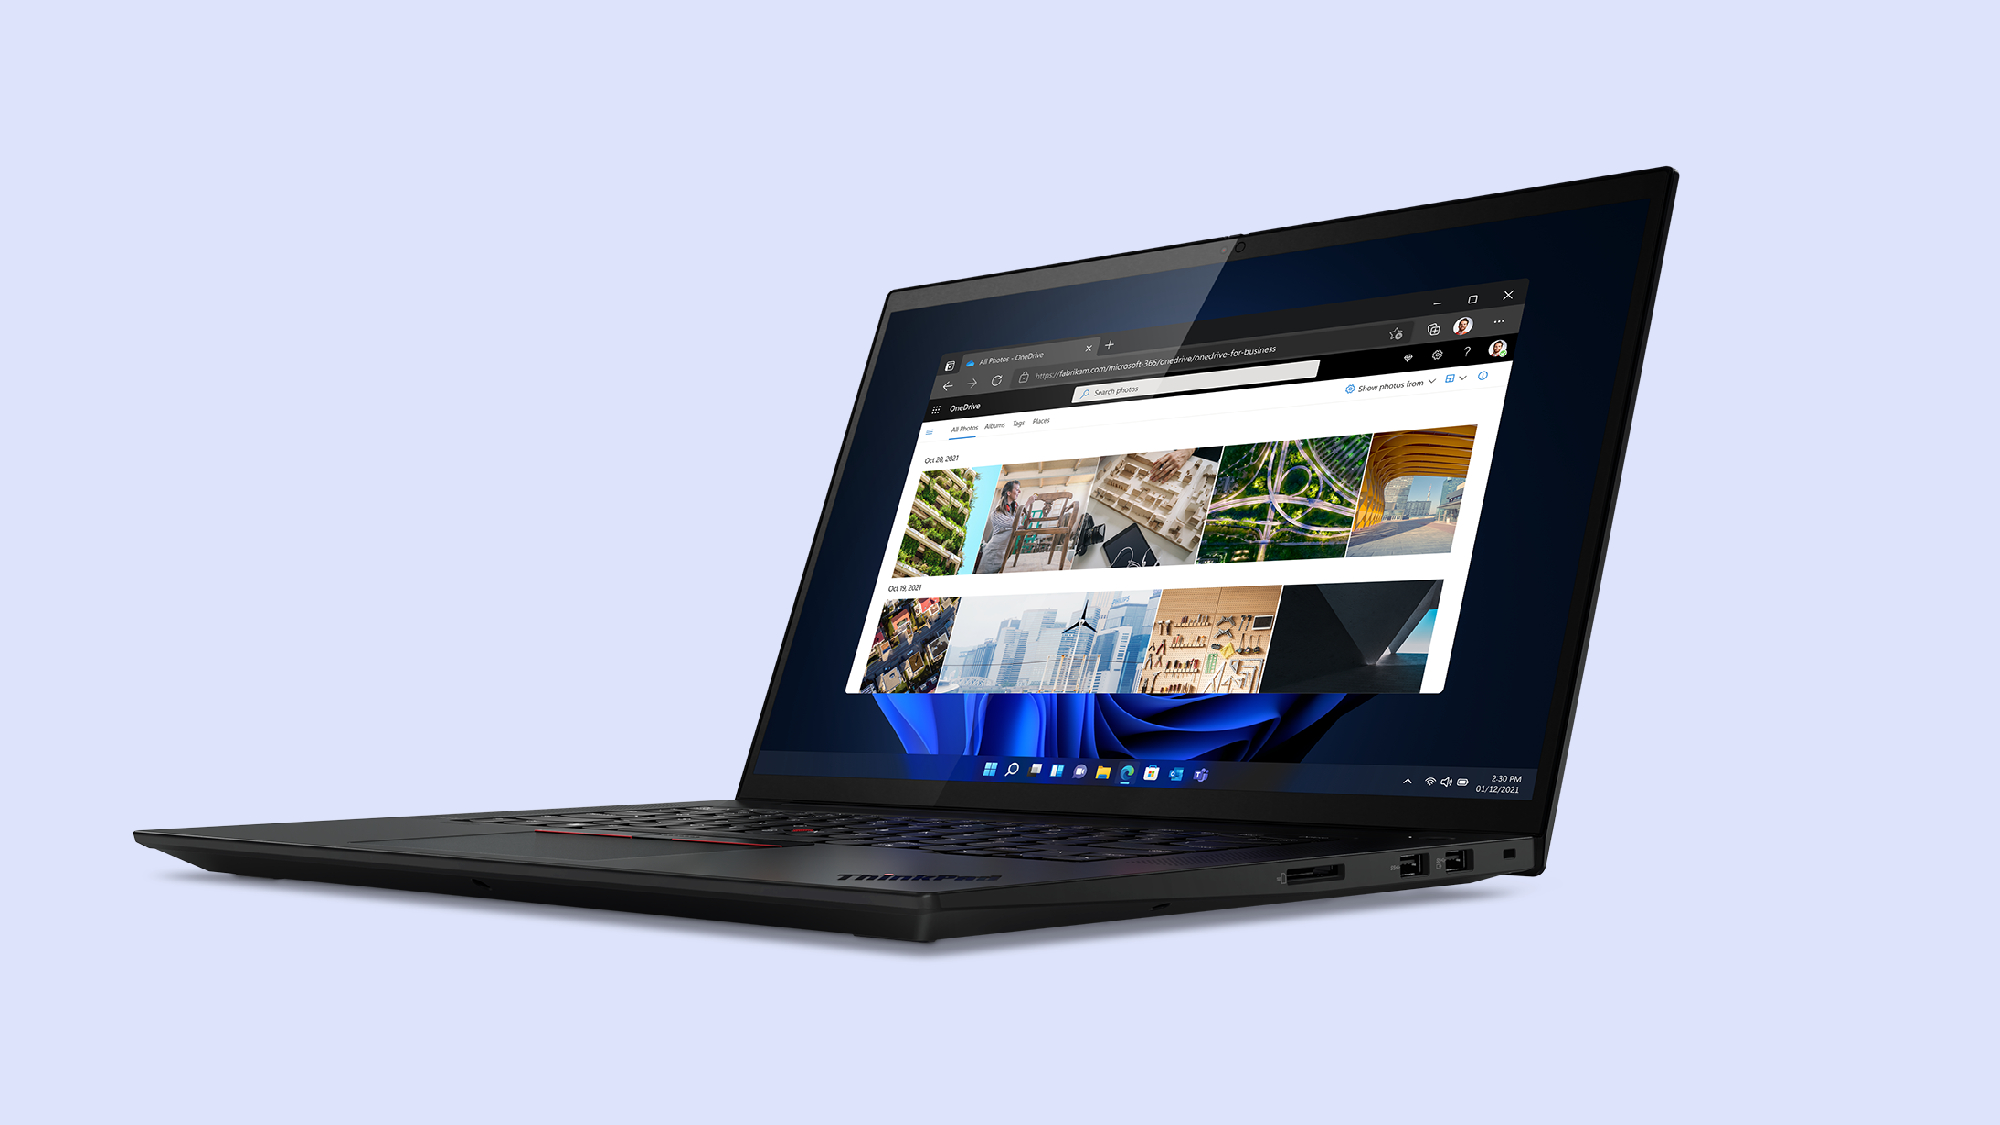 DELA DISCOUNT DrgSTFoxjnTamubYKkop9c Lenovo announces new ThinkPads at MWC Barcelona 2022 — one is the world's first Snapdragon 8cx Gen 3 laptop DELA DISCOUNT  